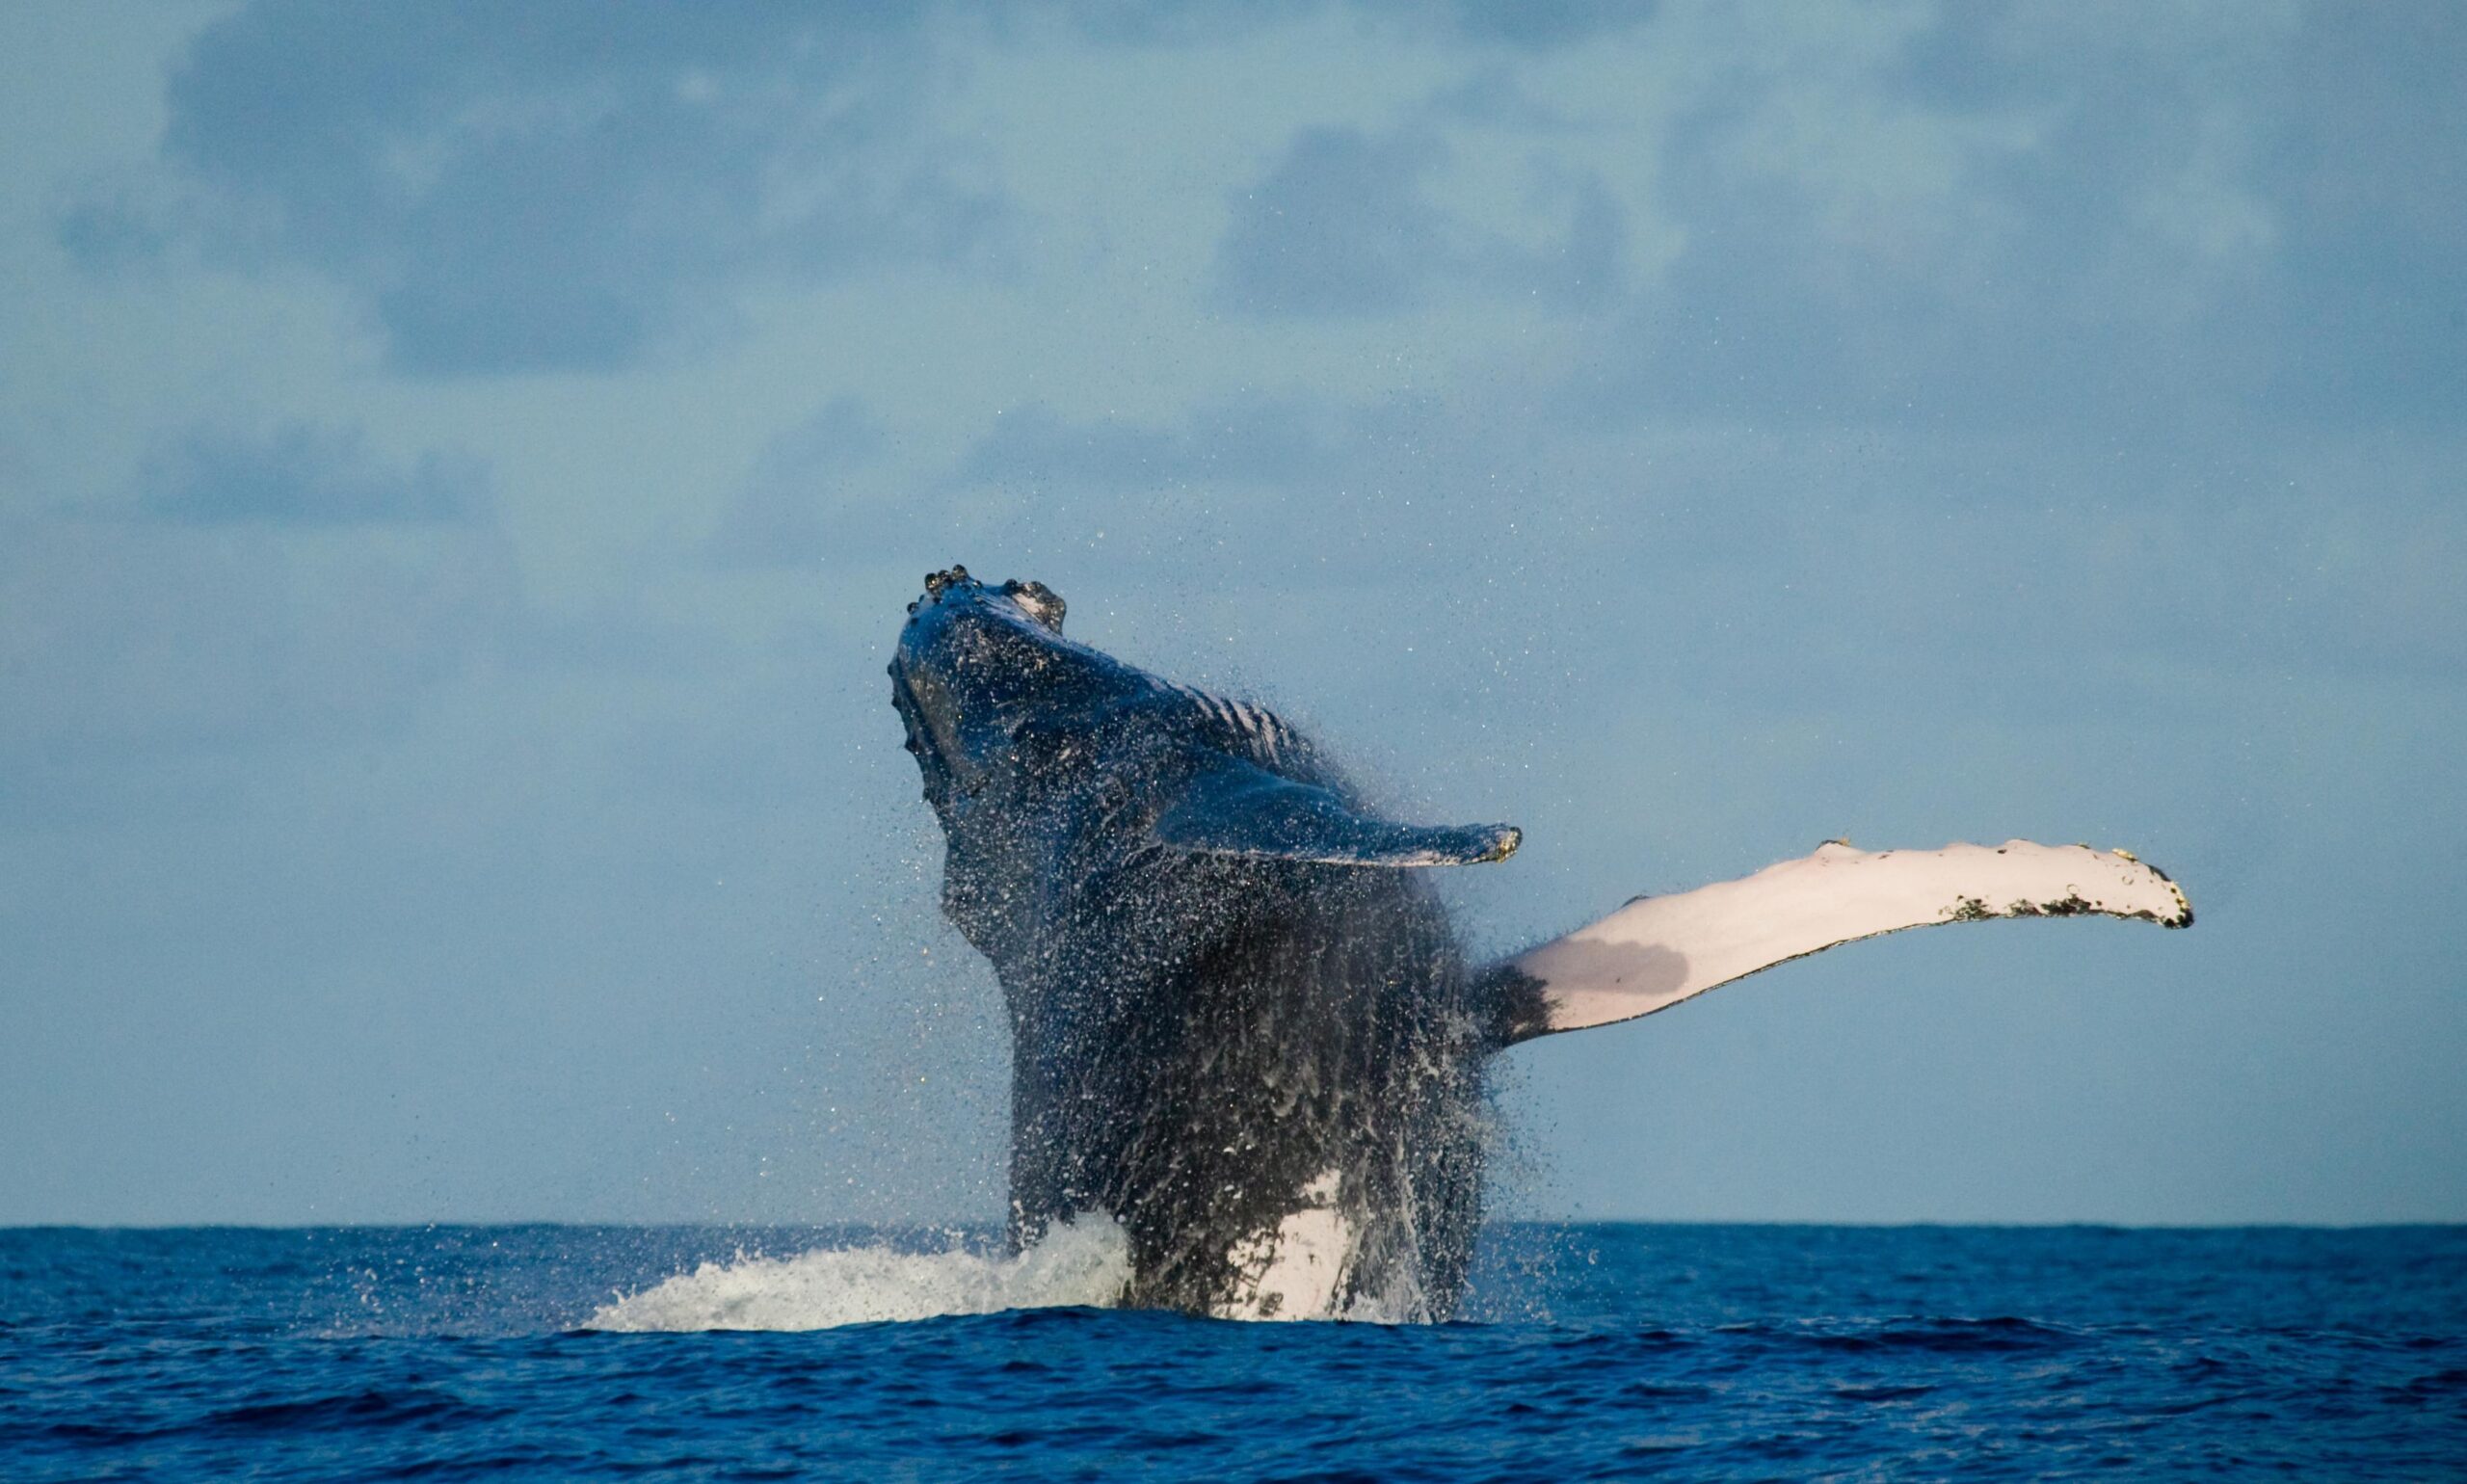 humpback-whale-is-jumping-out-water (1)